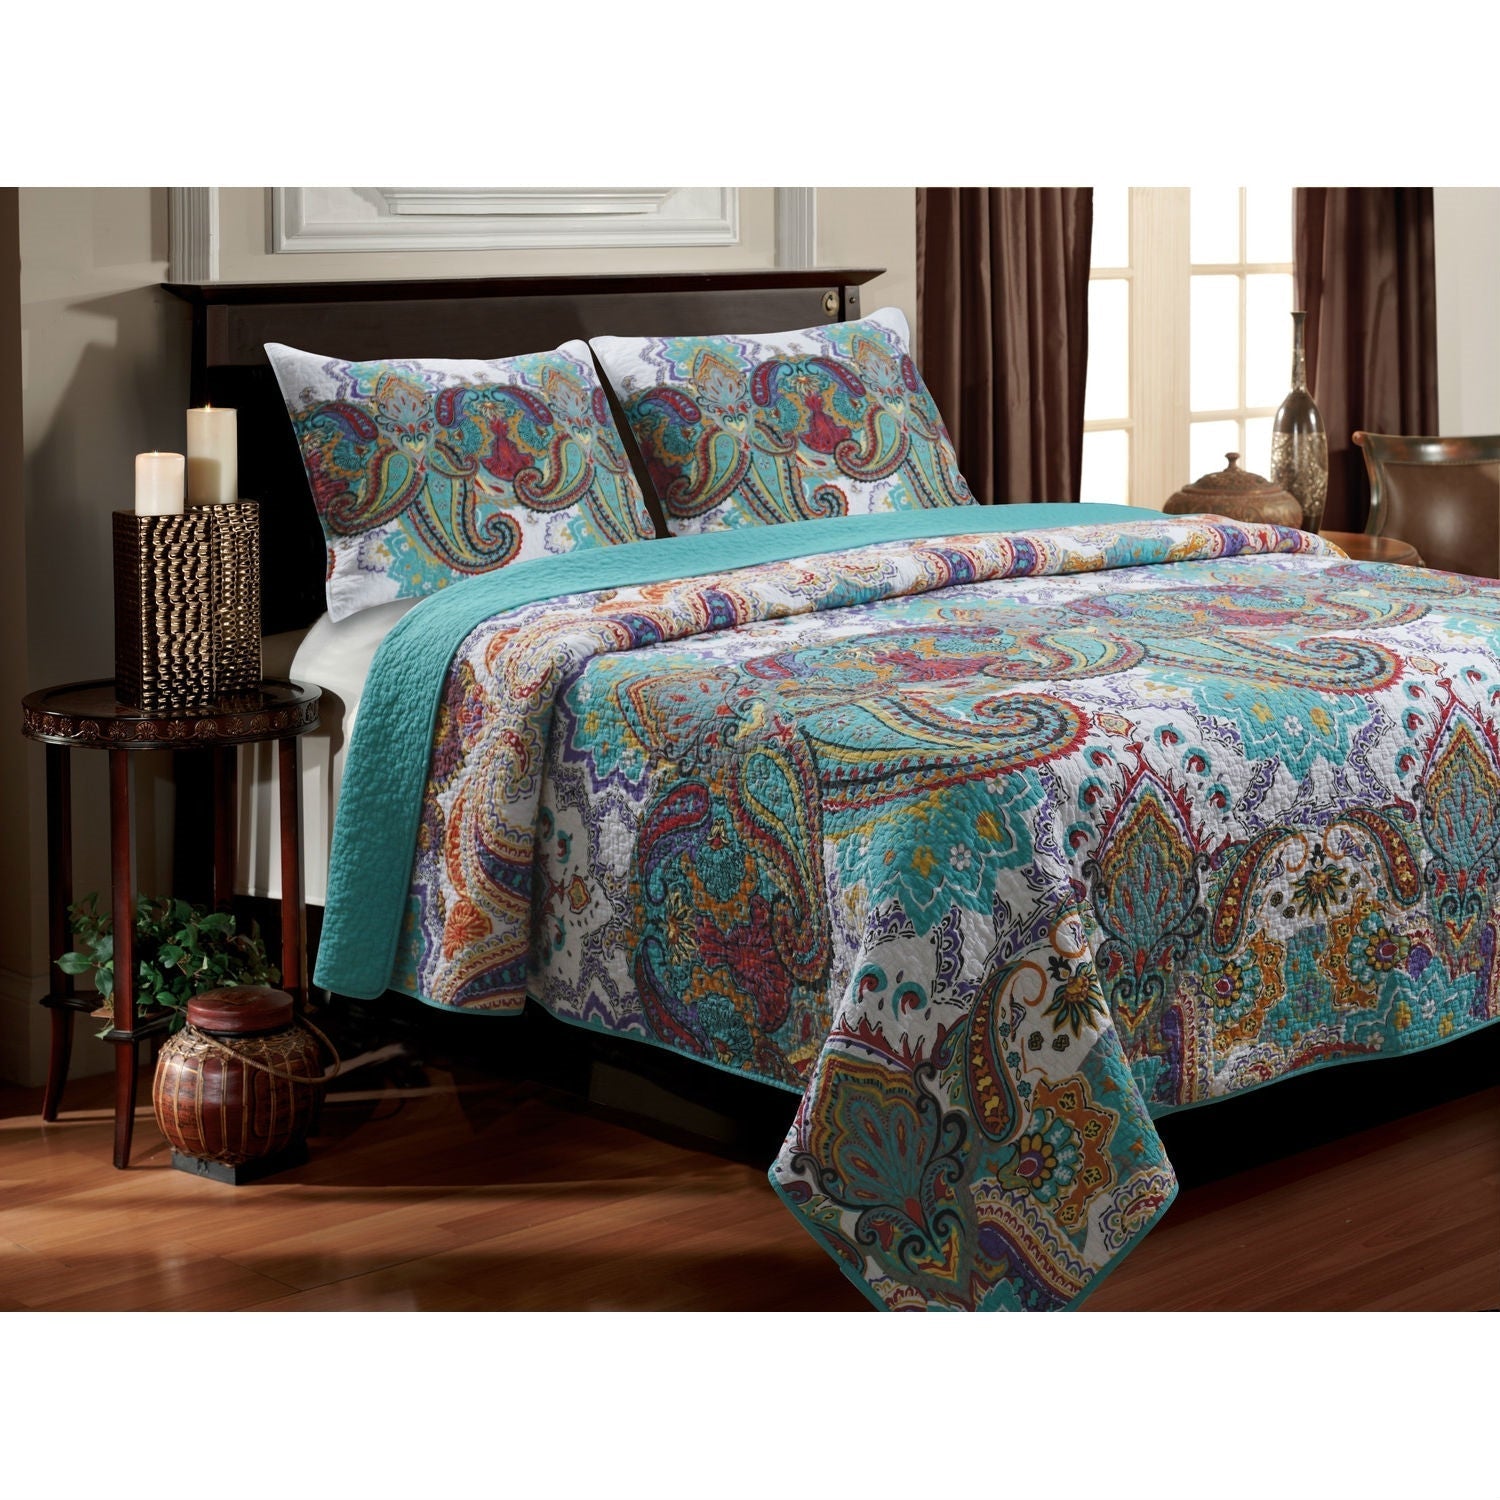 Bedroom > Quilts & Blankets - Twin Size 3-Piece Cotton Quilt Set In Teal Multi-Color Paisley Pattern